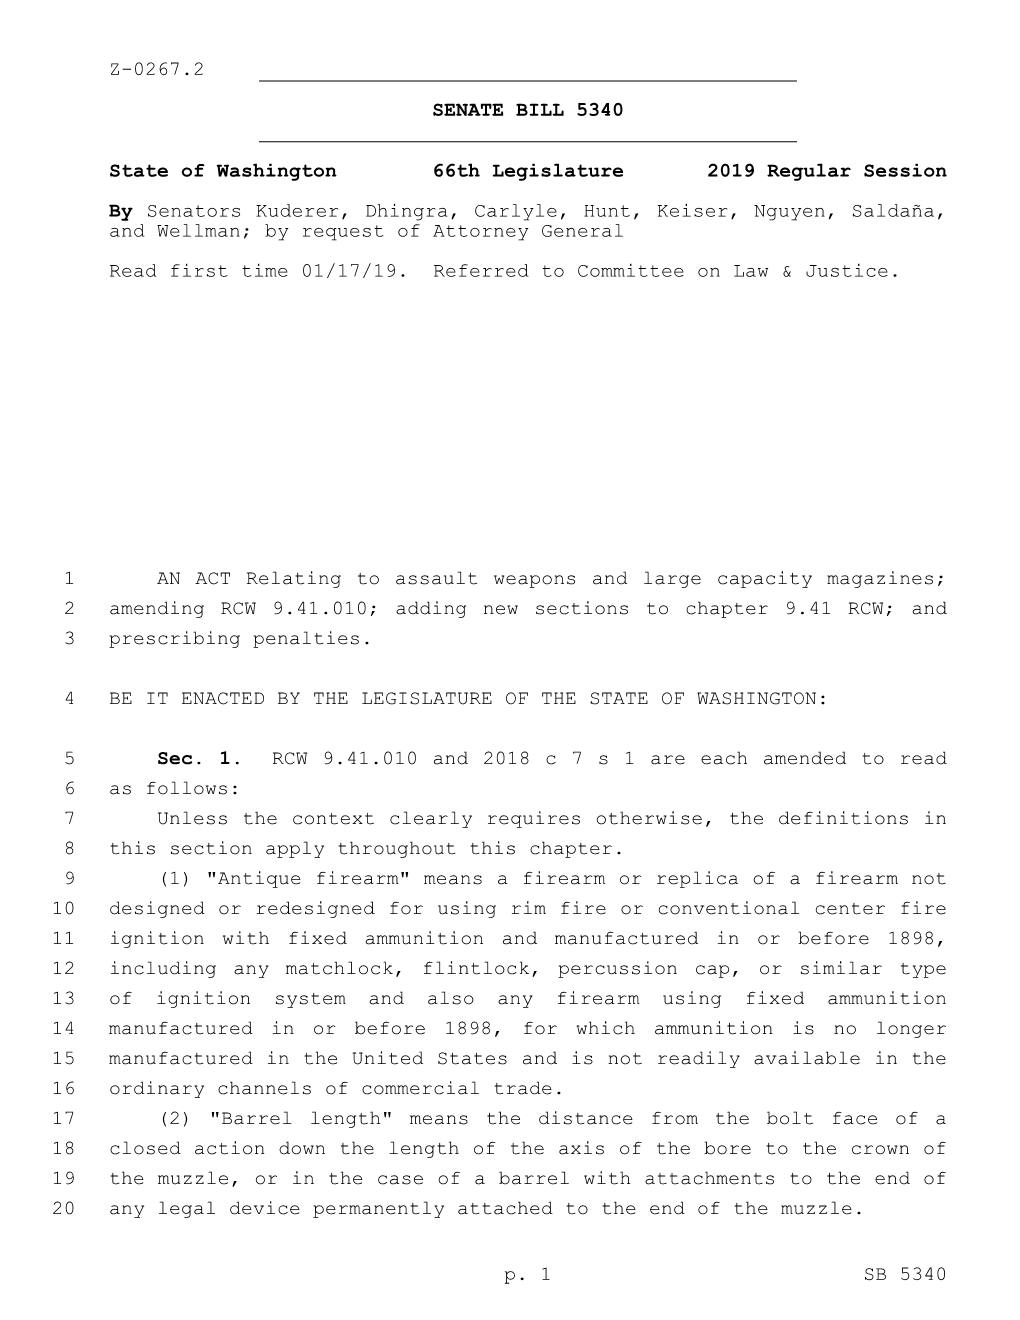 AN ACT Relating to Assault Weapons and Large Capacity Magazines; 1 Amending RCW 9.41.010; Adding New Sections to Chapter 9.41 RC